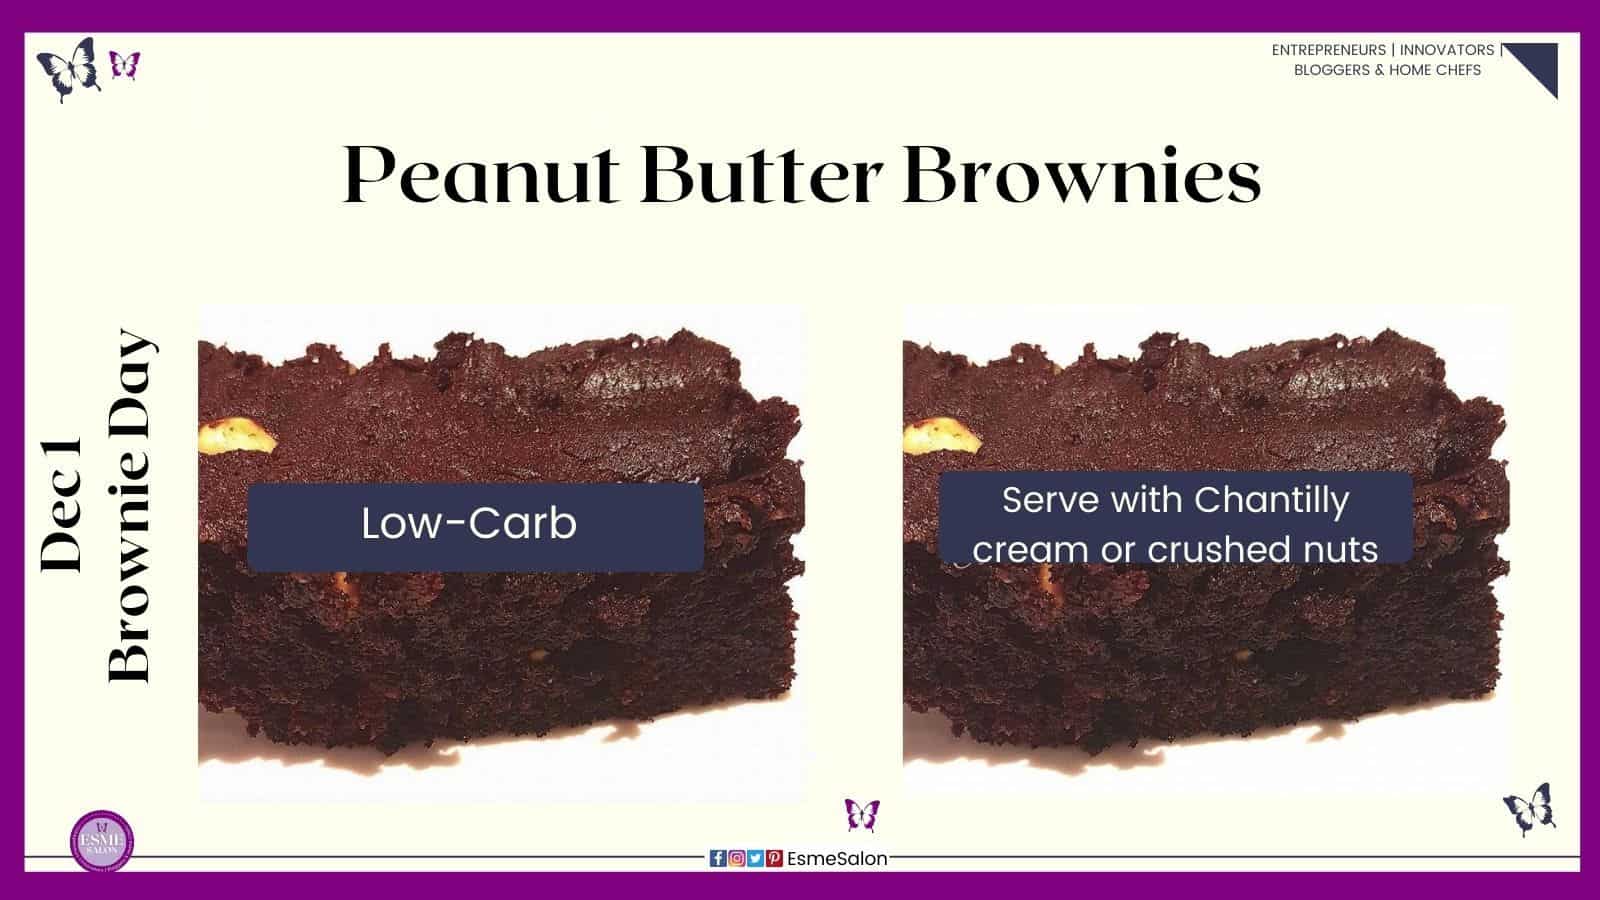 an image of low carb sugar free Peanut Butter Brownies